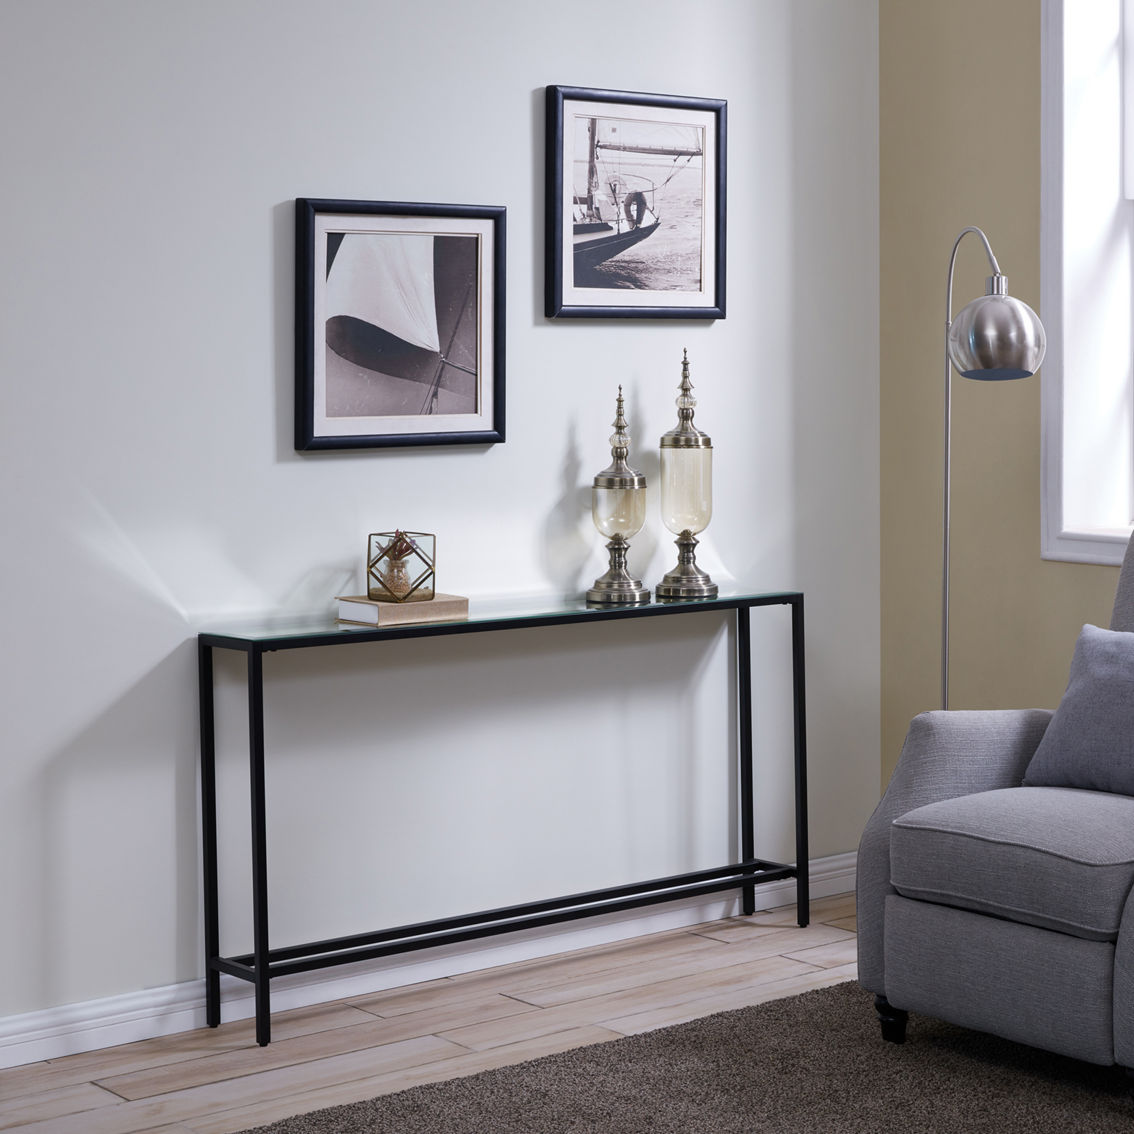 SEI Darrin Narrow Long Console Table with Mirrored Top Gunmetal Gray - Image 2 of 4